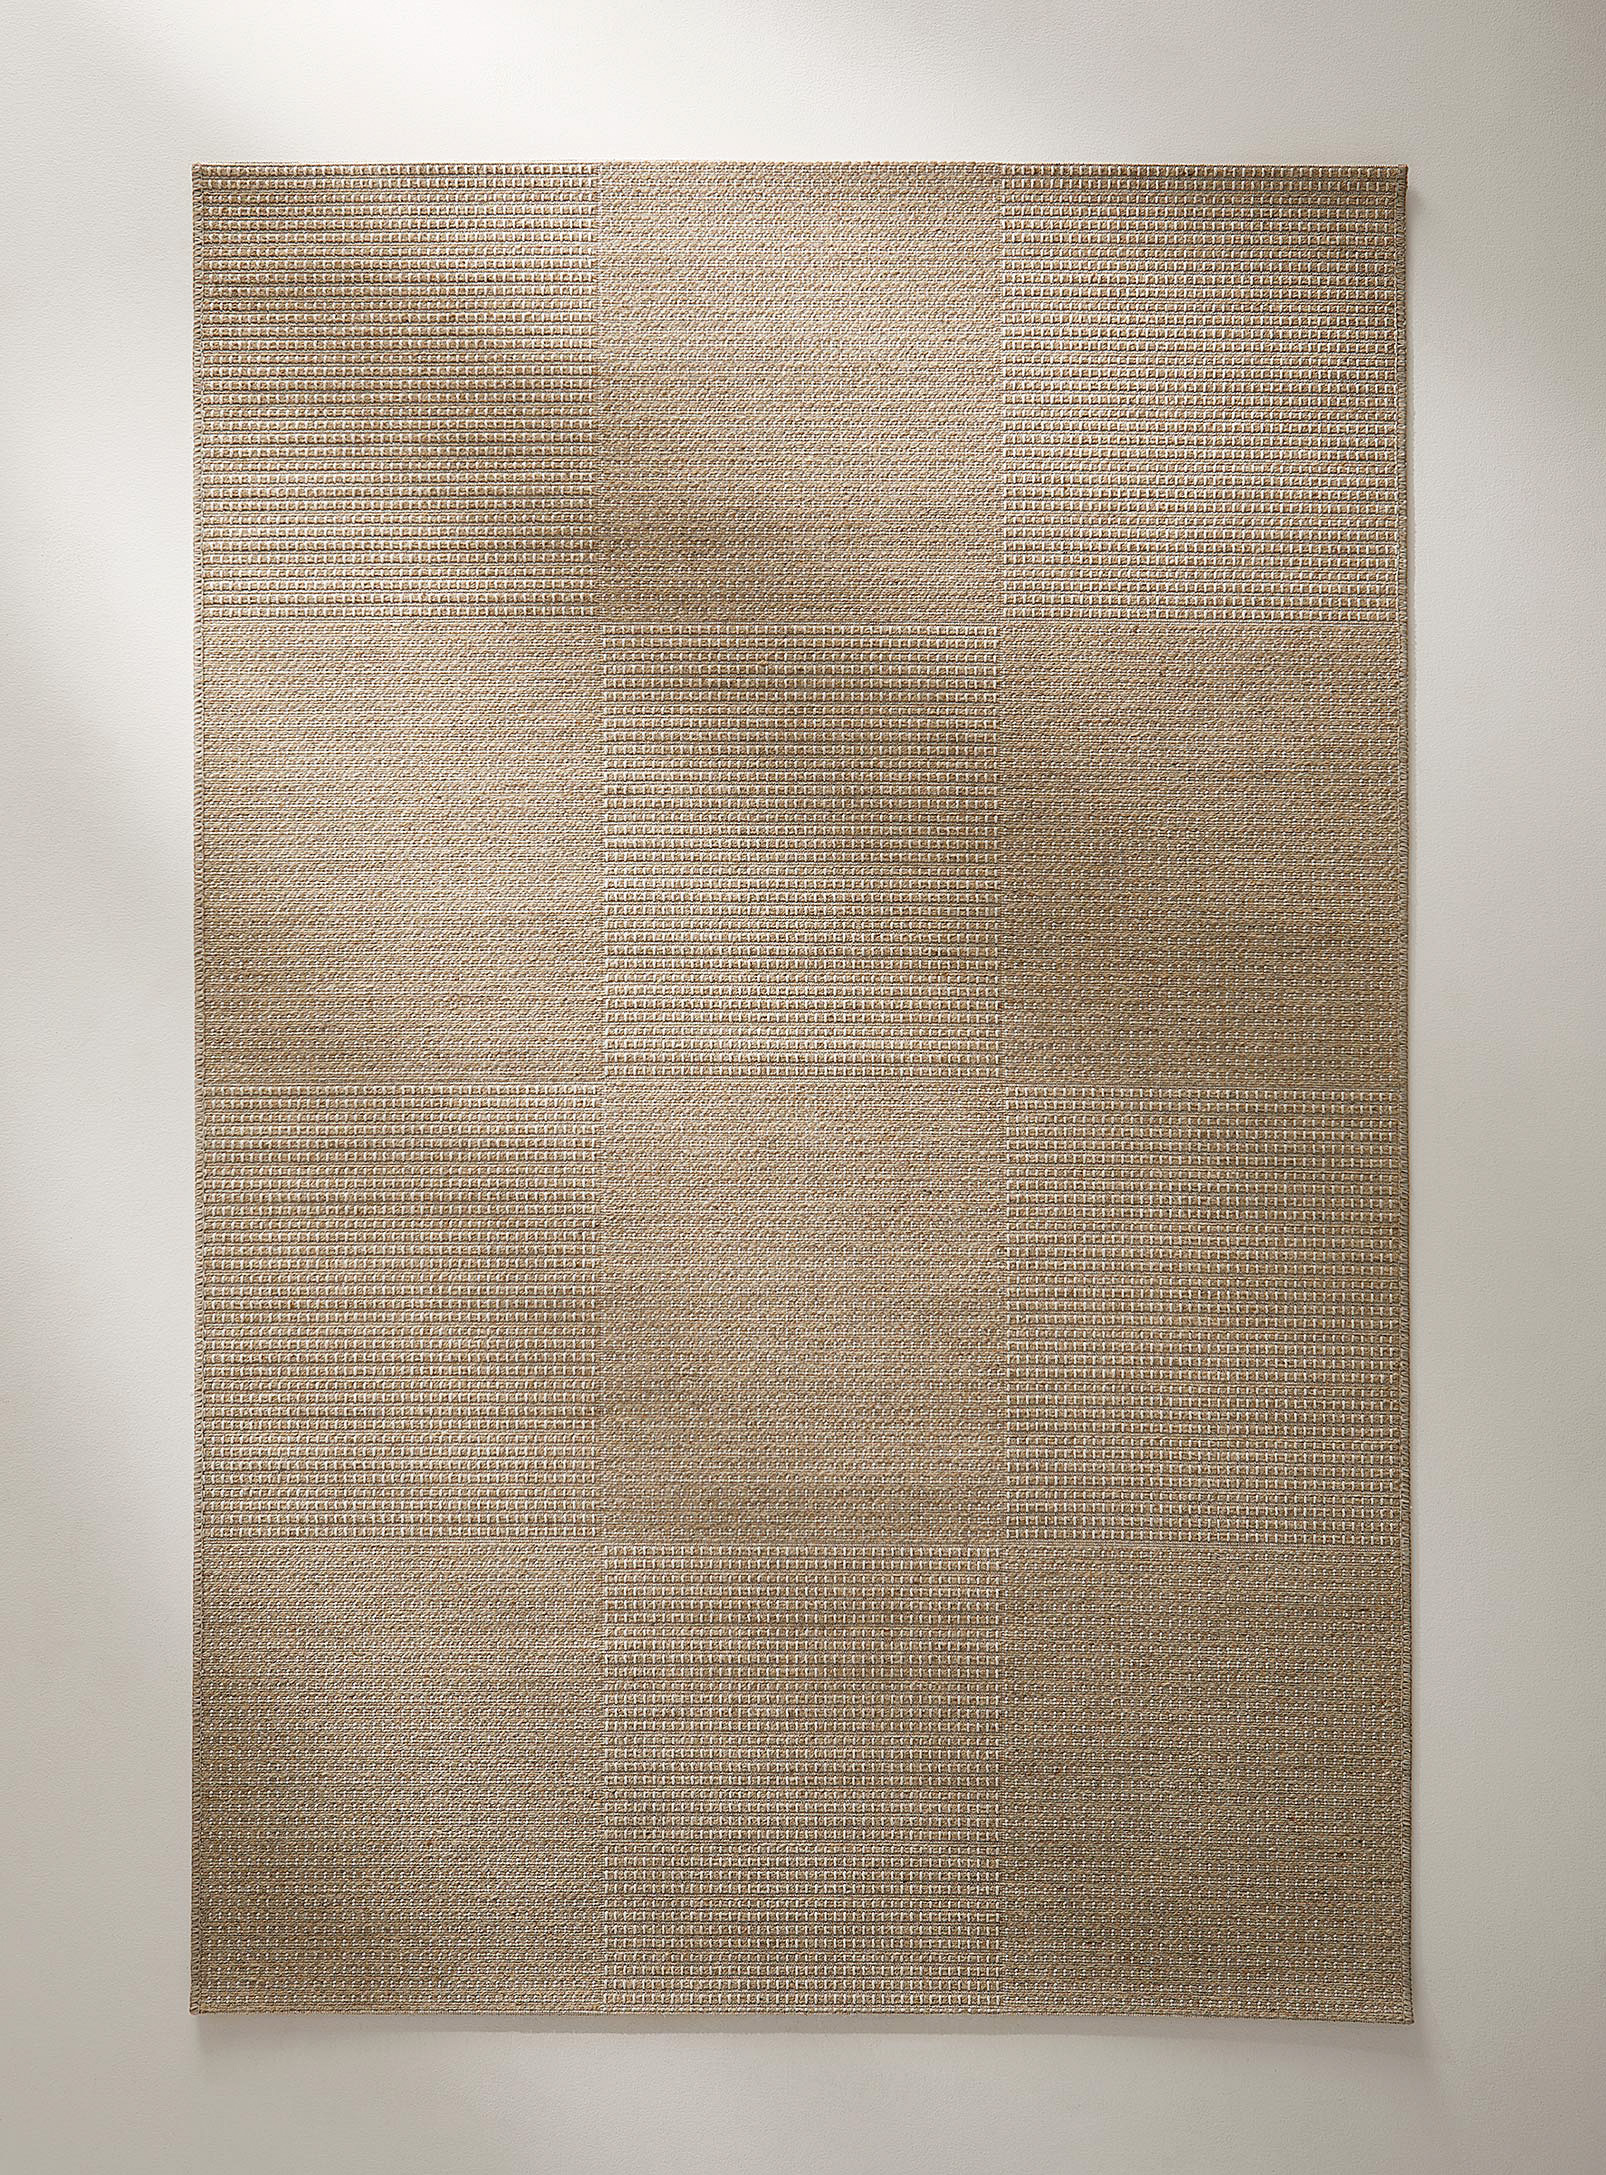 Braided jute artisanal rug See available sizes